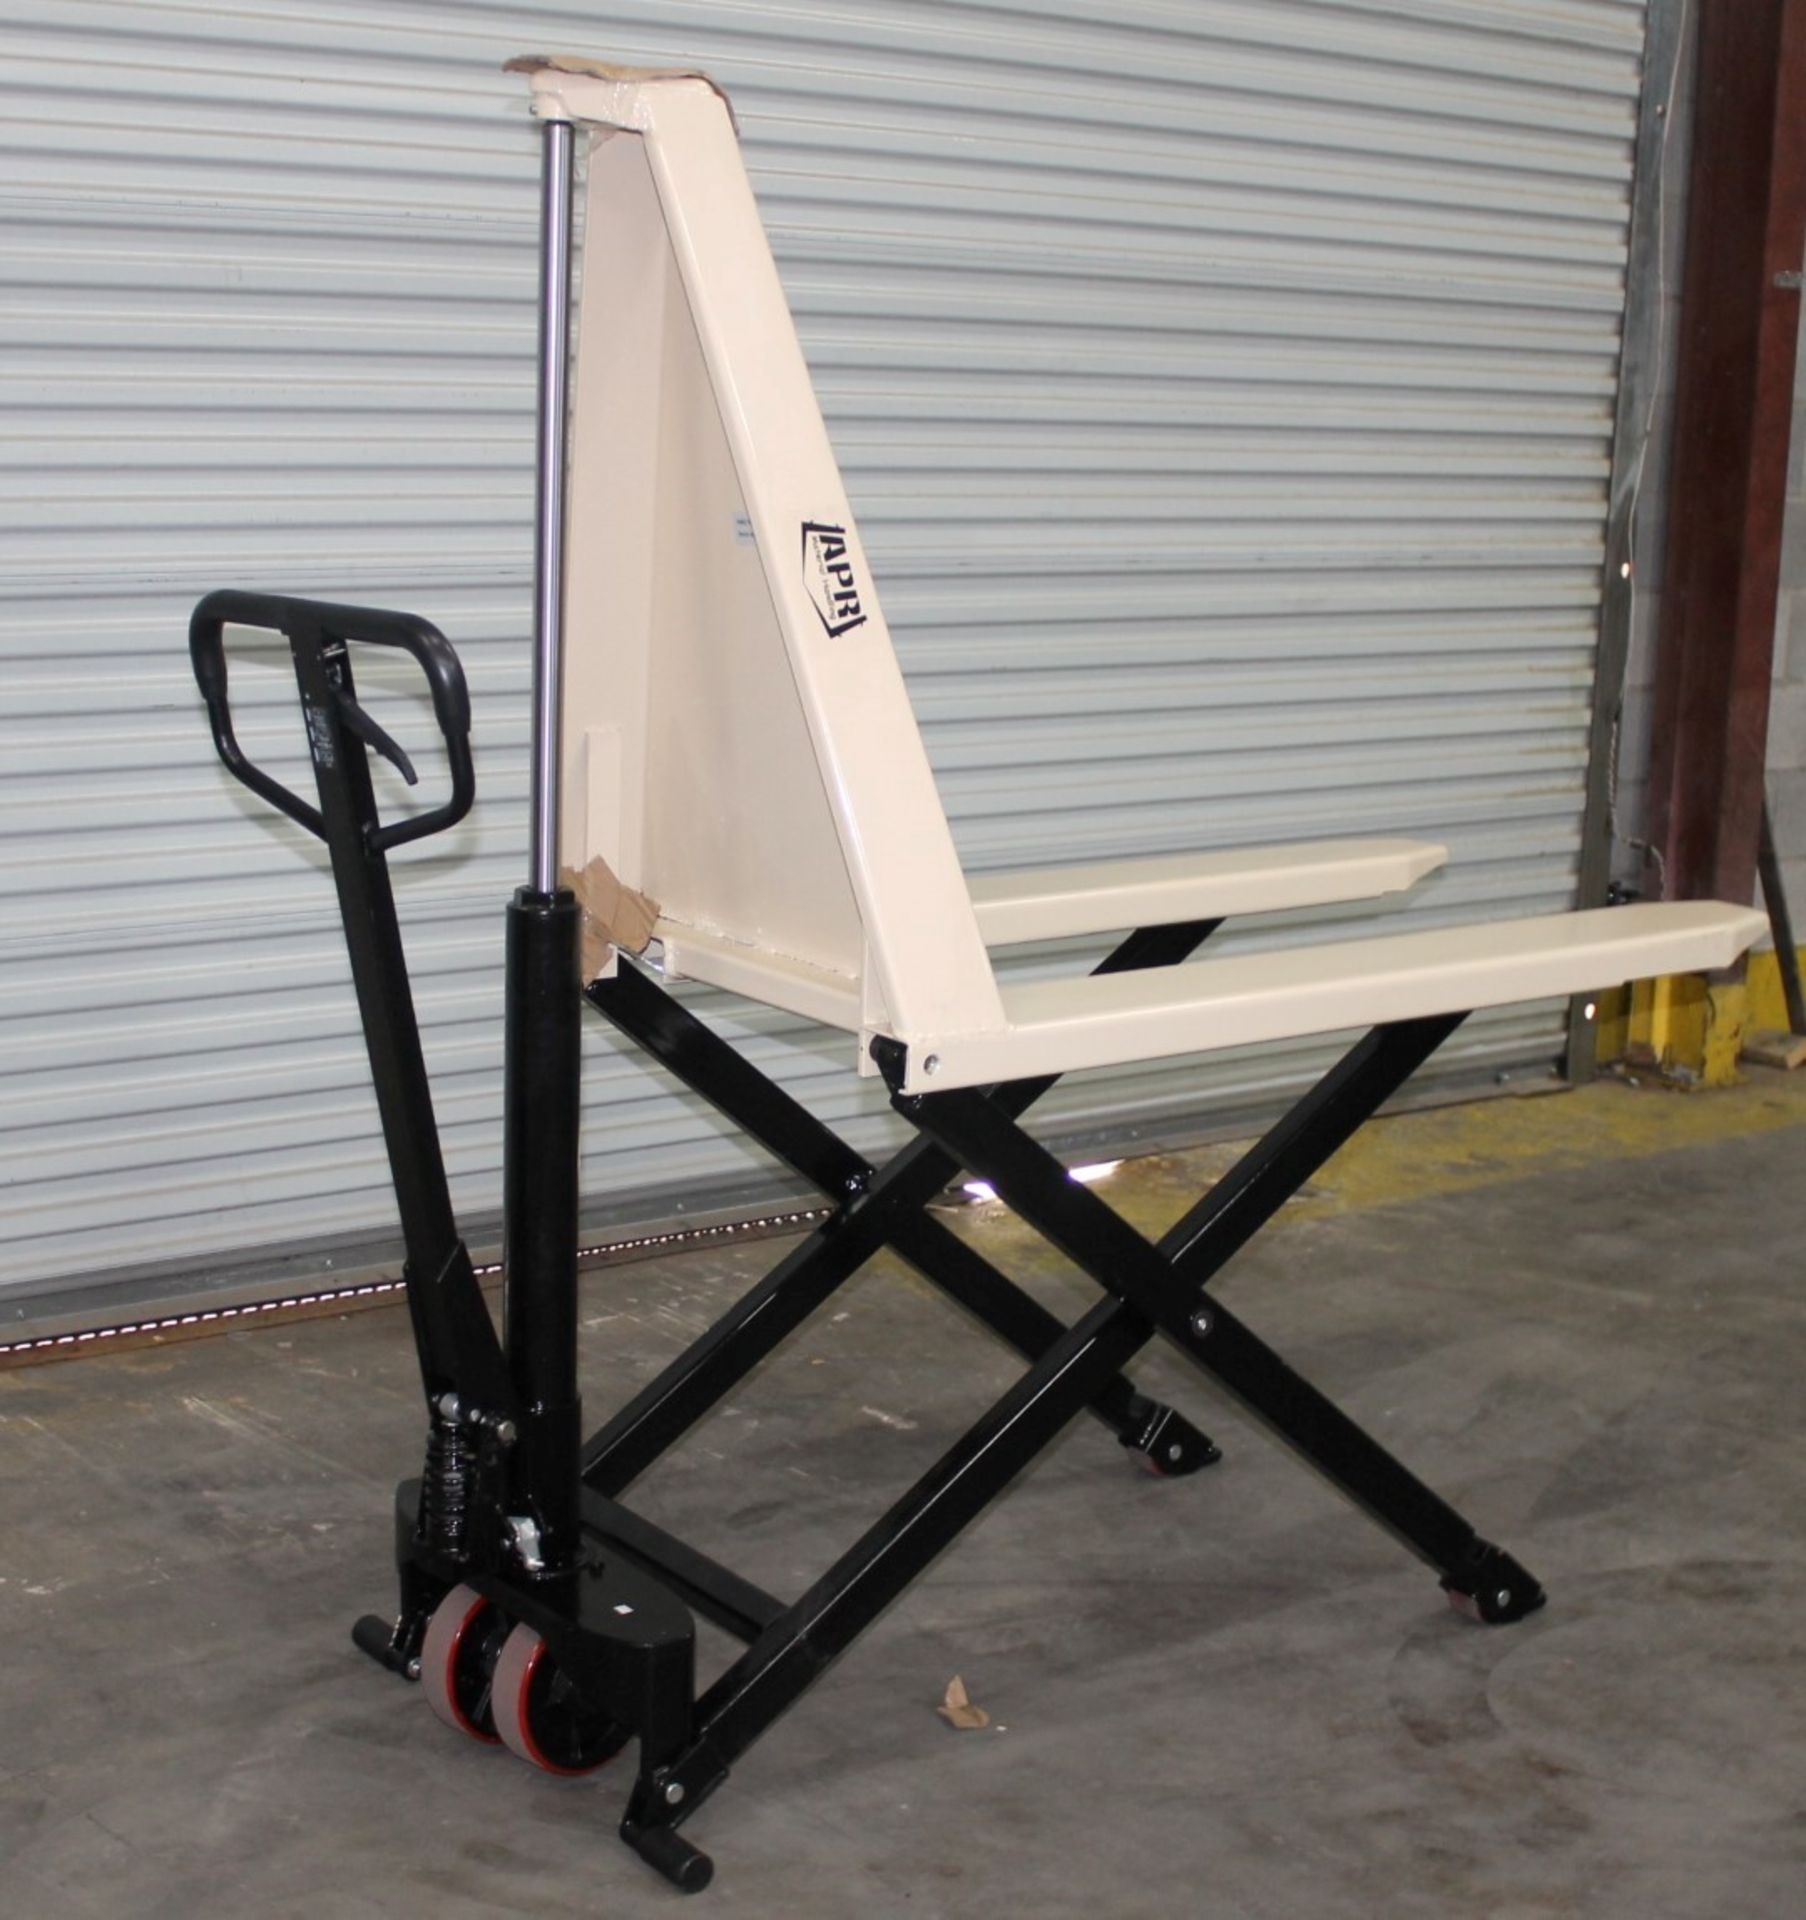 HIGH LIFT PALLET TRUCK,  CAPACITY: 2200 lb, FORK SIZE: 27" x 48", LOWERED FORK HEIGHT: 3.35 - Image 2 of 5